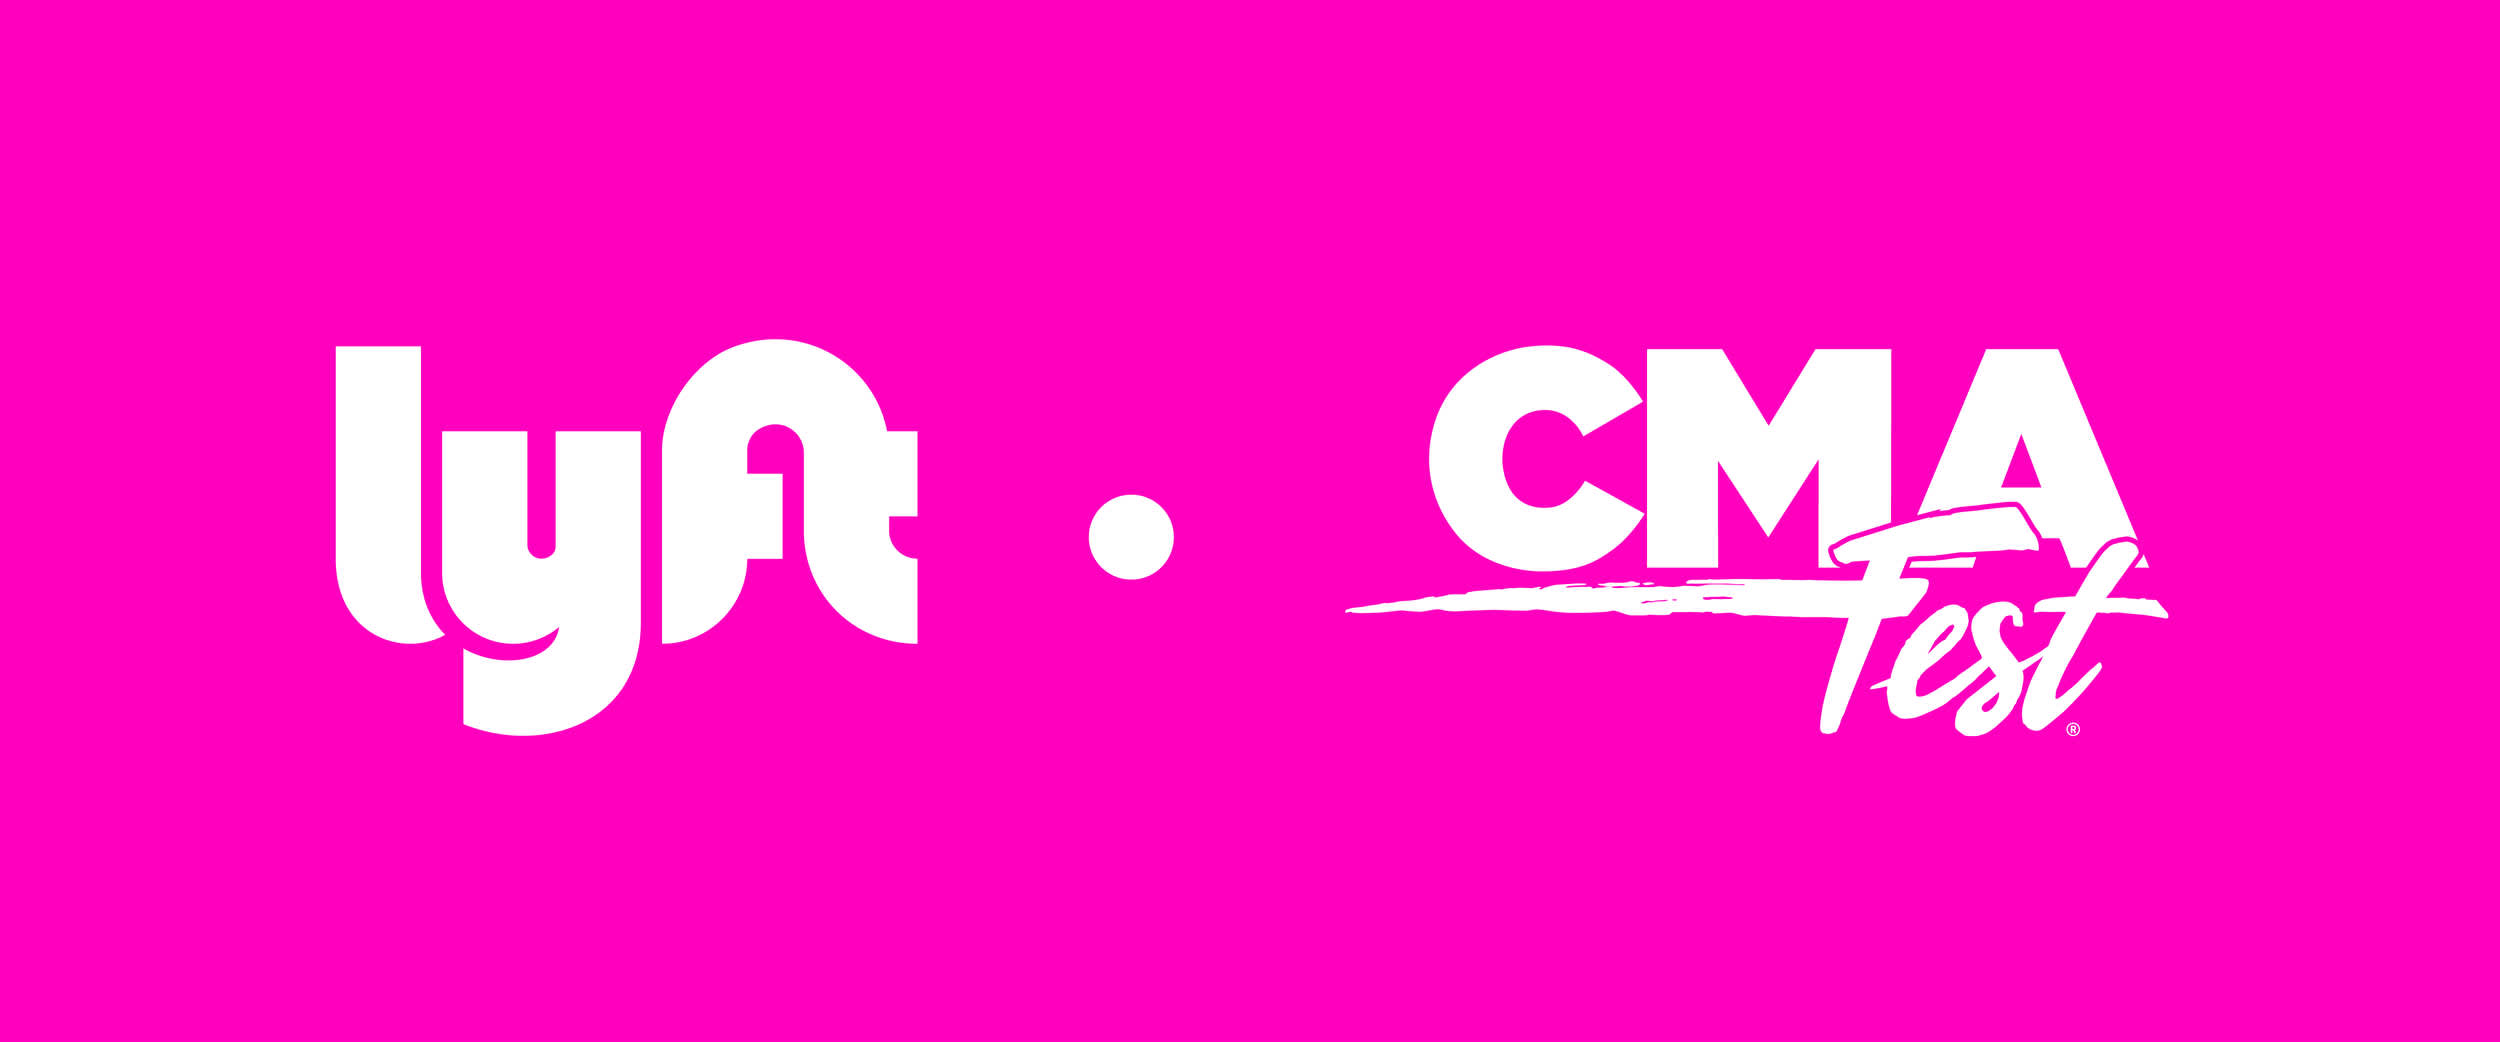 Lyft and CMA Fest logos in white on a pink background.